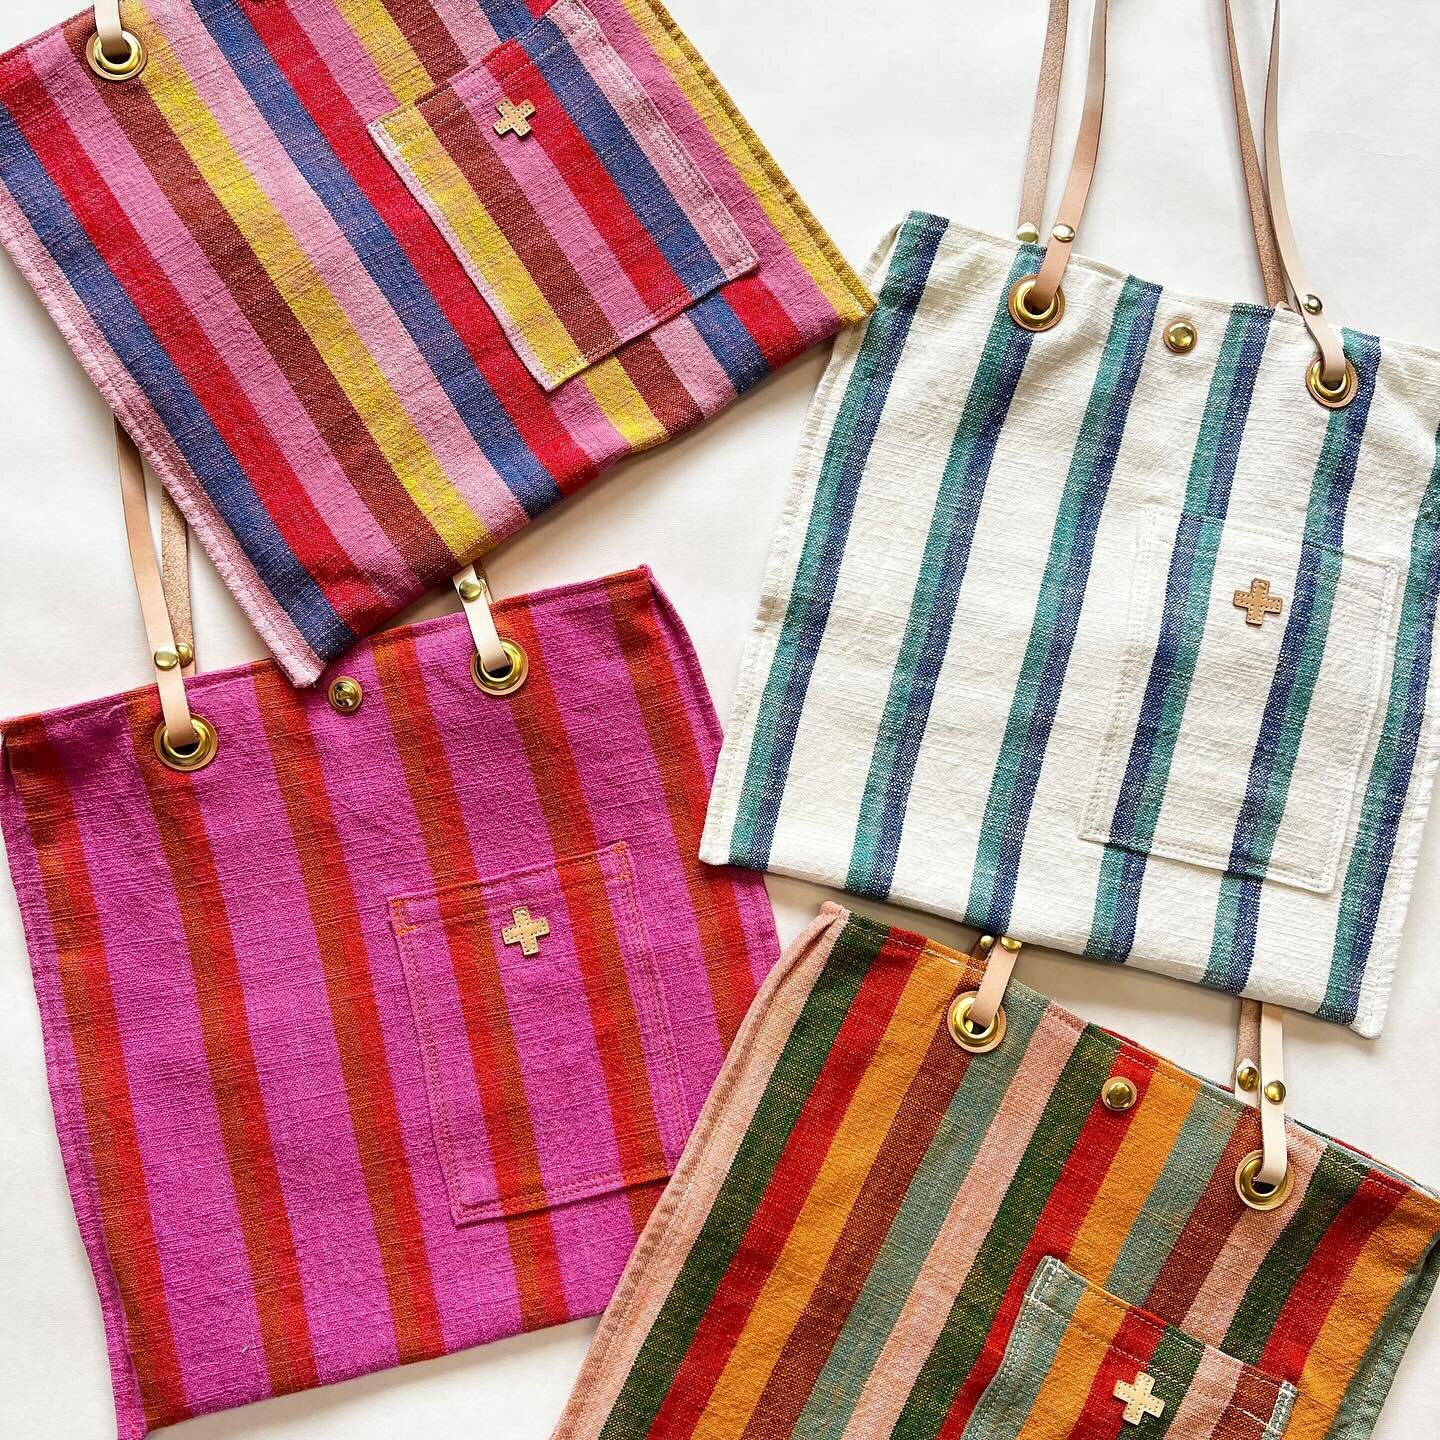 Colorful stripe totes are available on line. The natural vegtanned straps snap off for easy washing. We&rsquo;re definitely feeling the spring vibe at the shop.
(Reminder: our (6 month) sabbatical starts May 10. Get your summer on while we&rsquo;re o